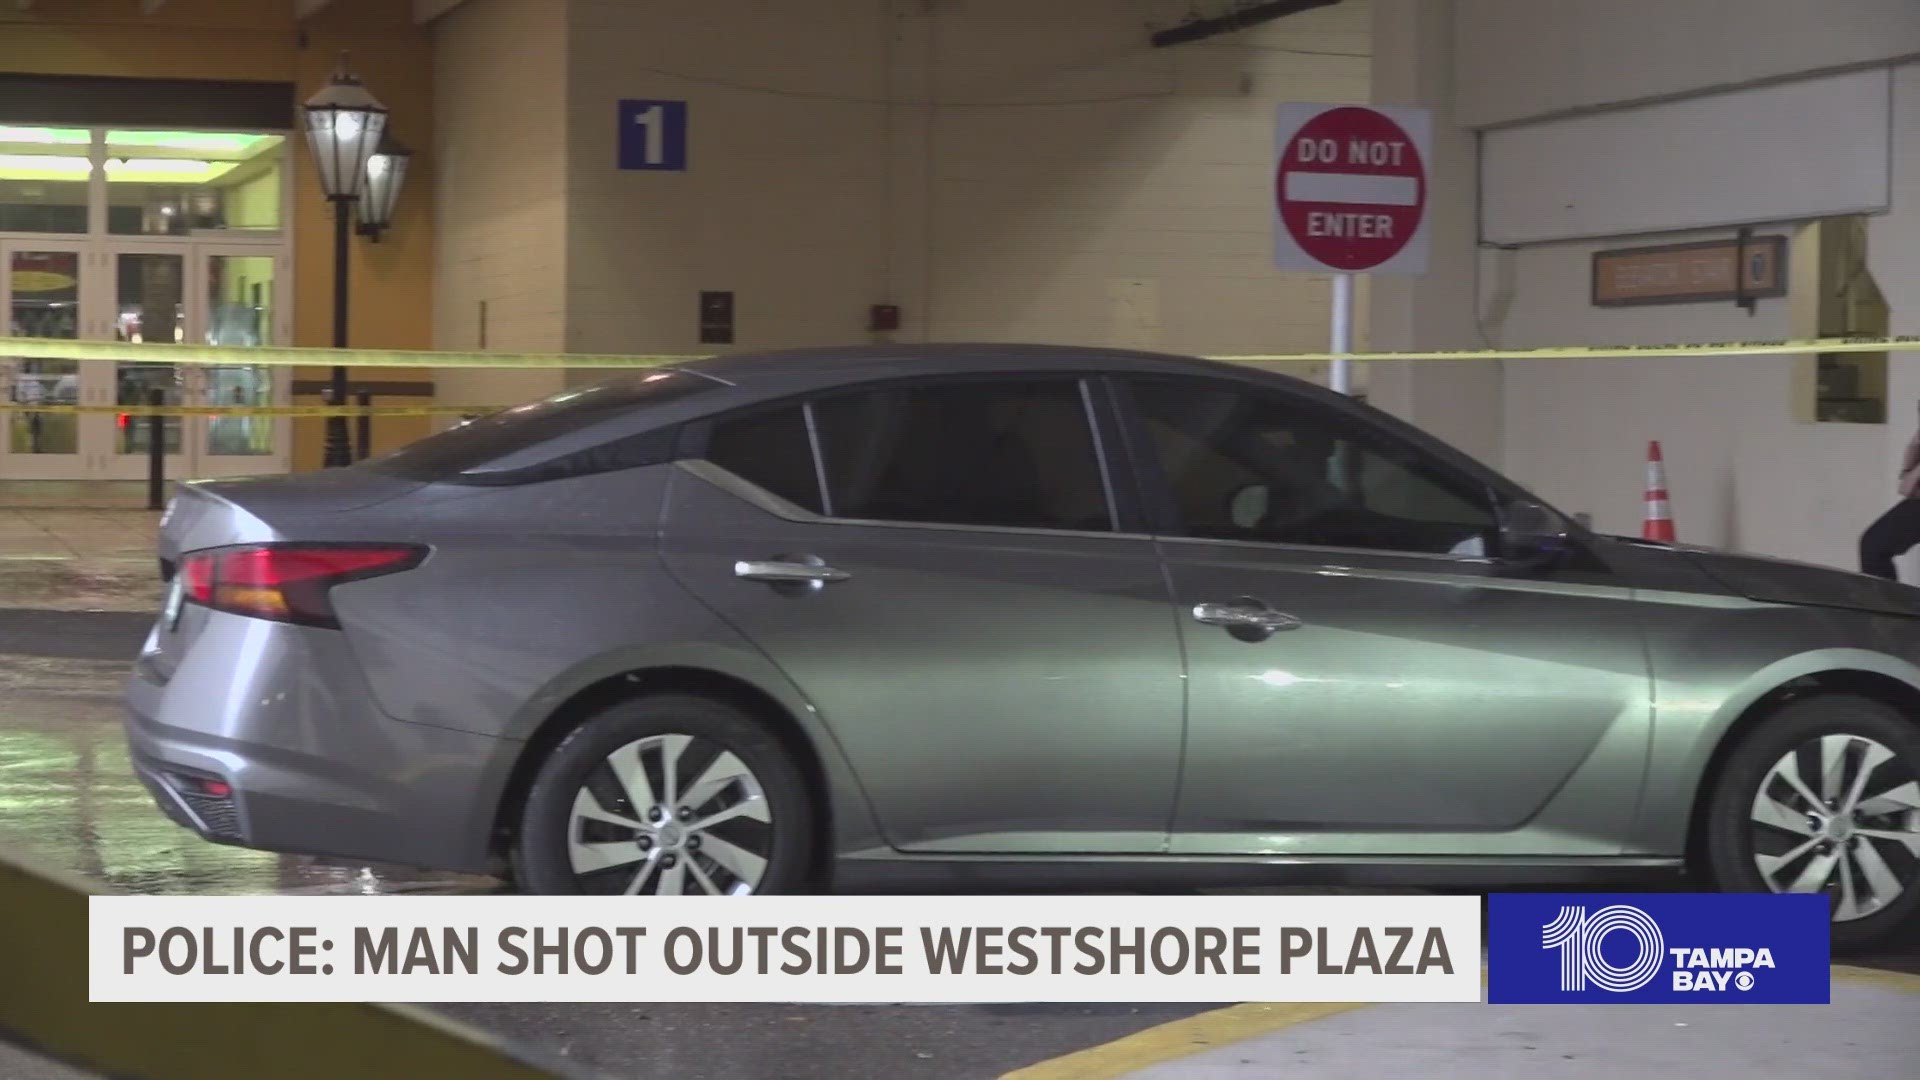 Tampa police are searching for the person responsible for a shooting that happened Wednesday in the parking lot of the Westshore Plaza.